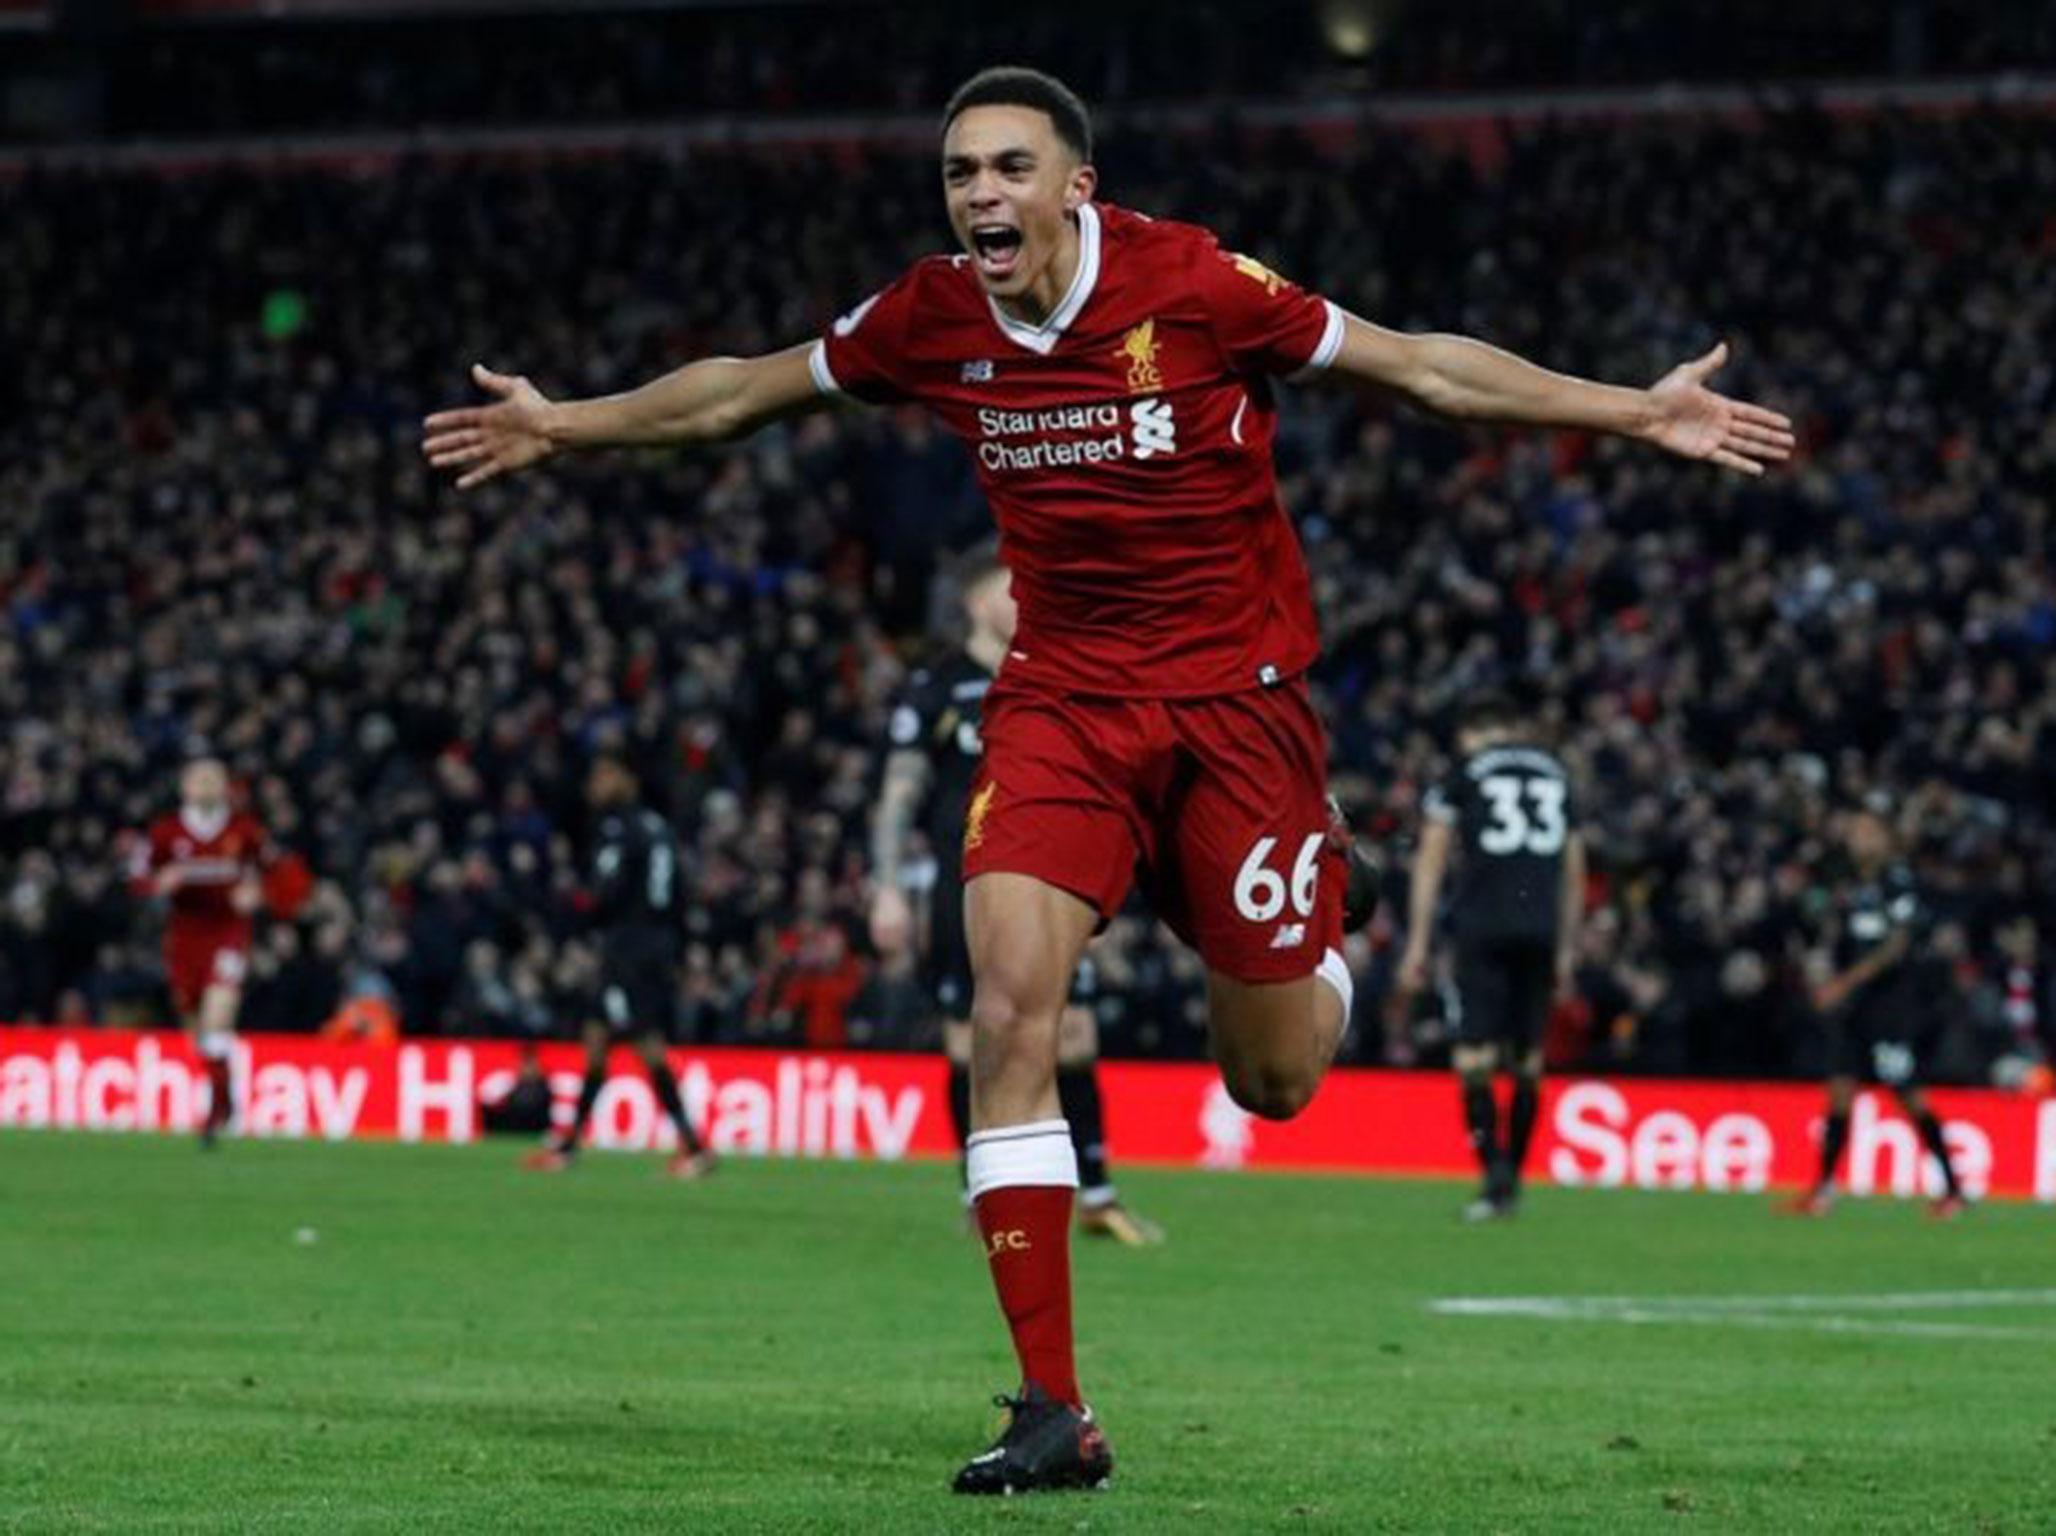 Trent Alexander-Arnold knows how much a trophy would mean to Liverpool fans